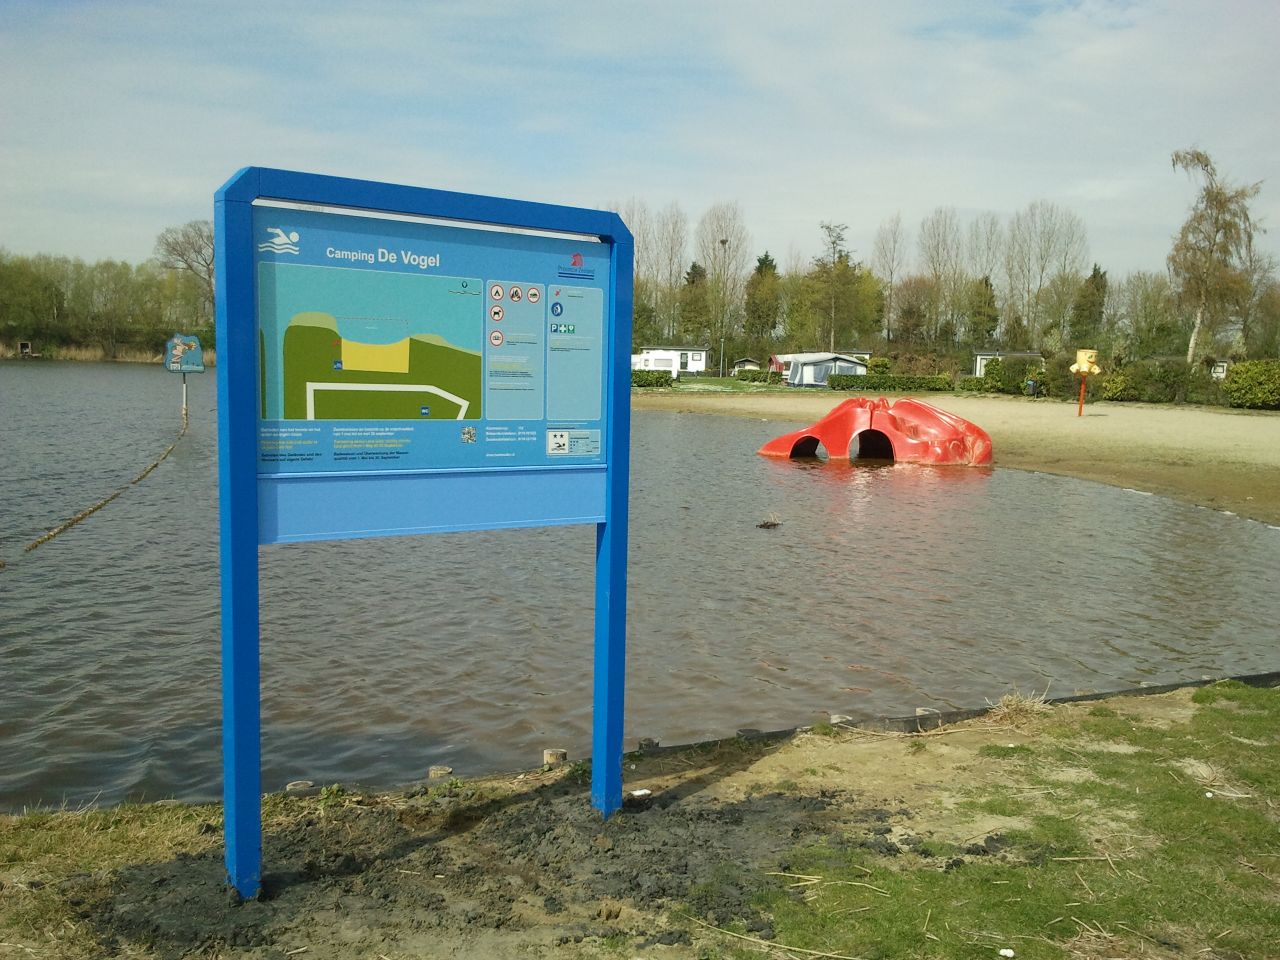 The information board at the swimming location De Vogel